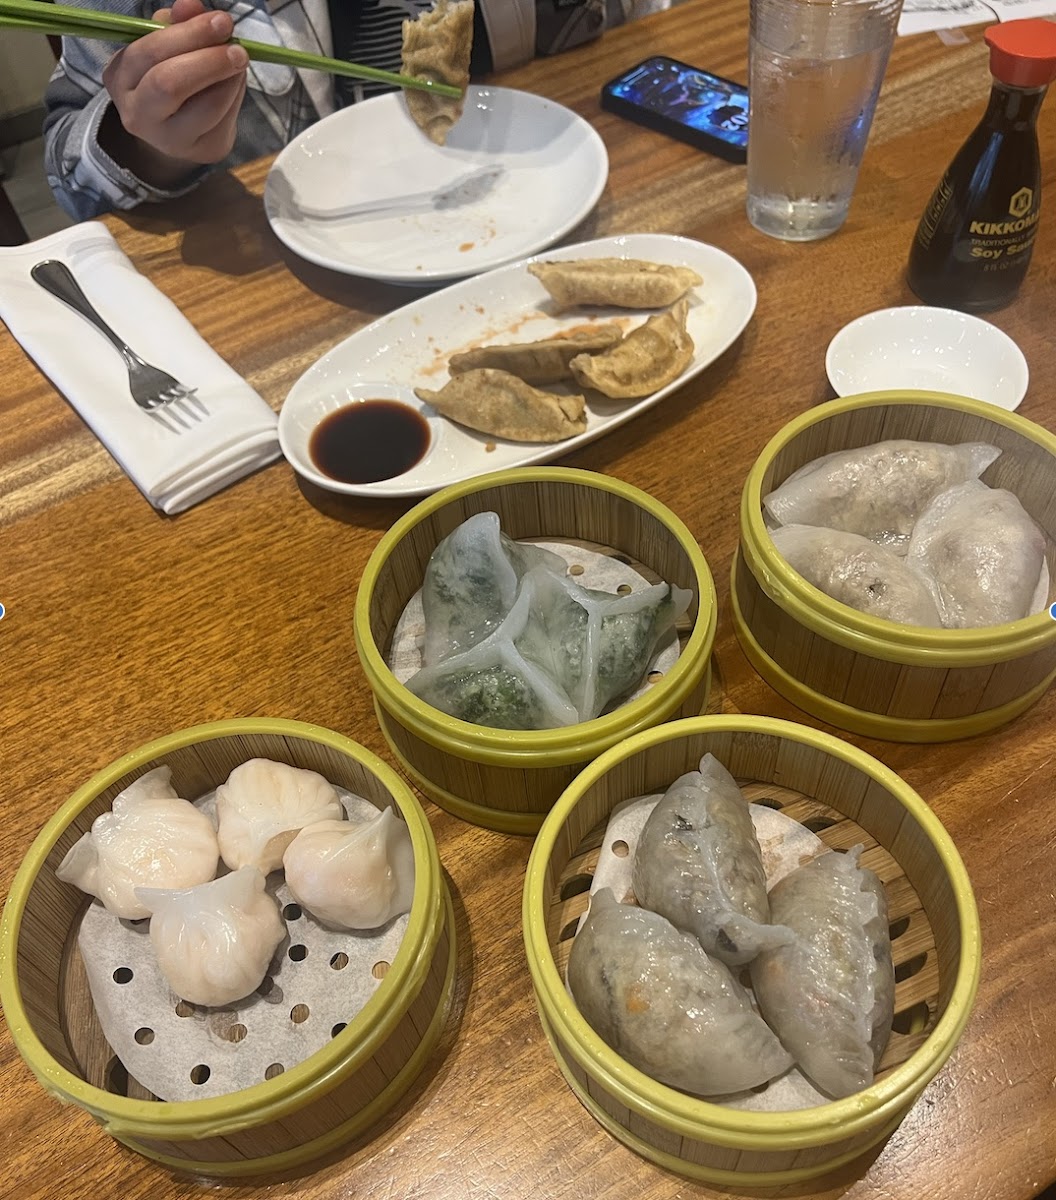 My GF dumplings and my sons regular pot stickers. Every dish that came out they were very communicative on whether it was safe for me to eat.